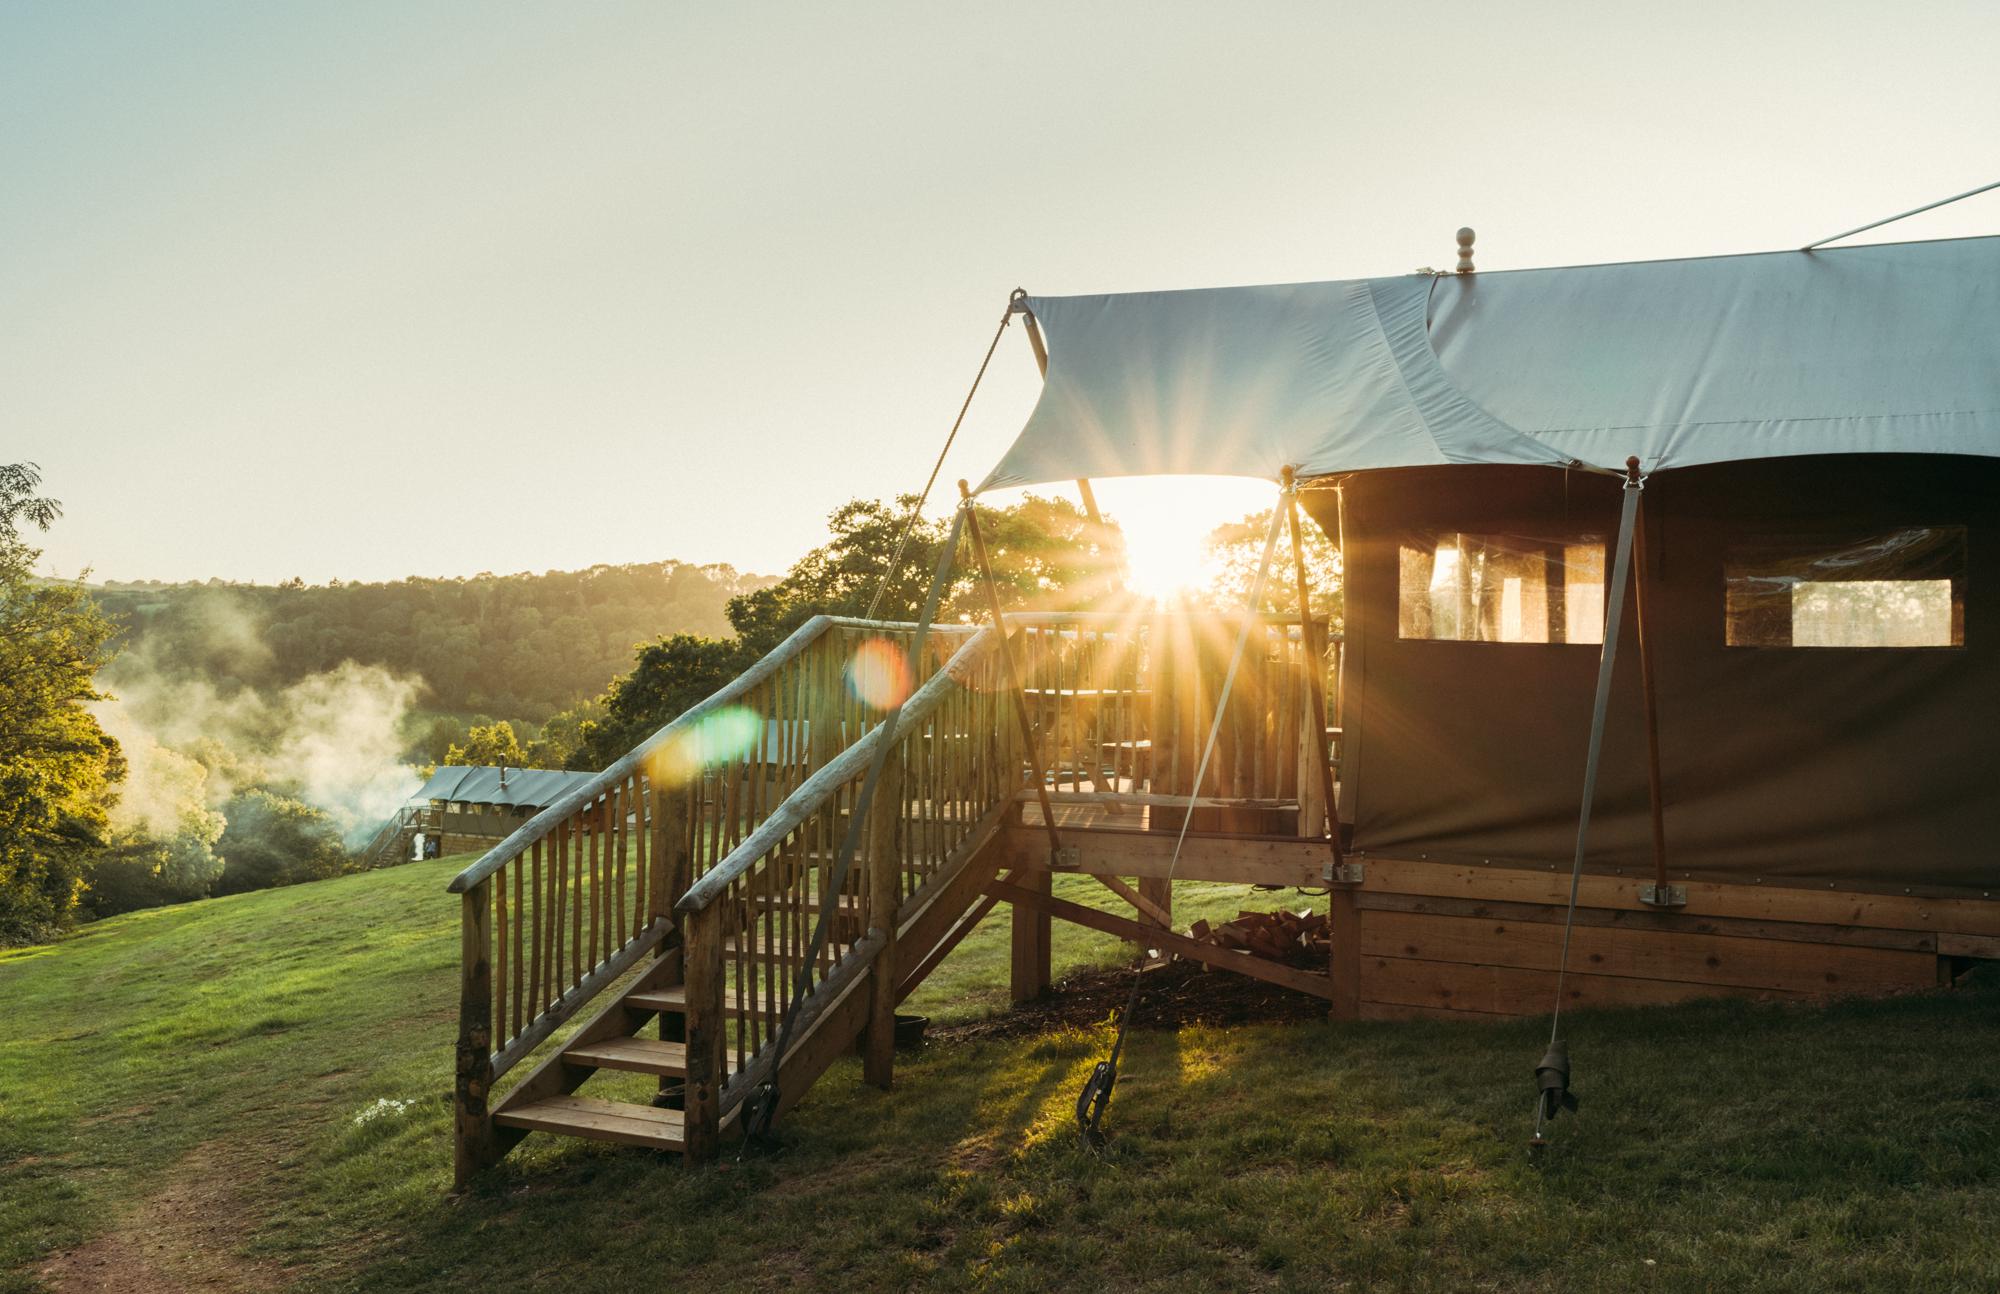 Book your next UK Glamping holiday direct with Cool Places.